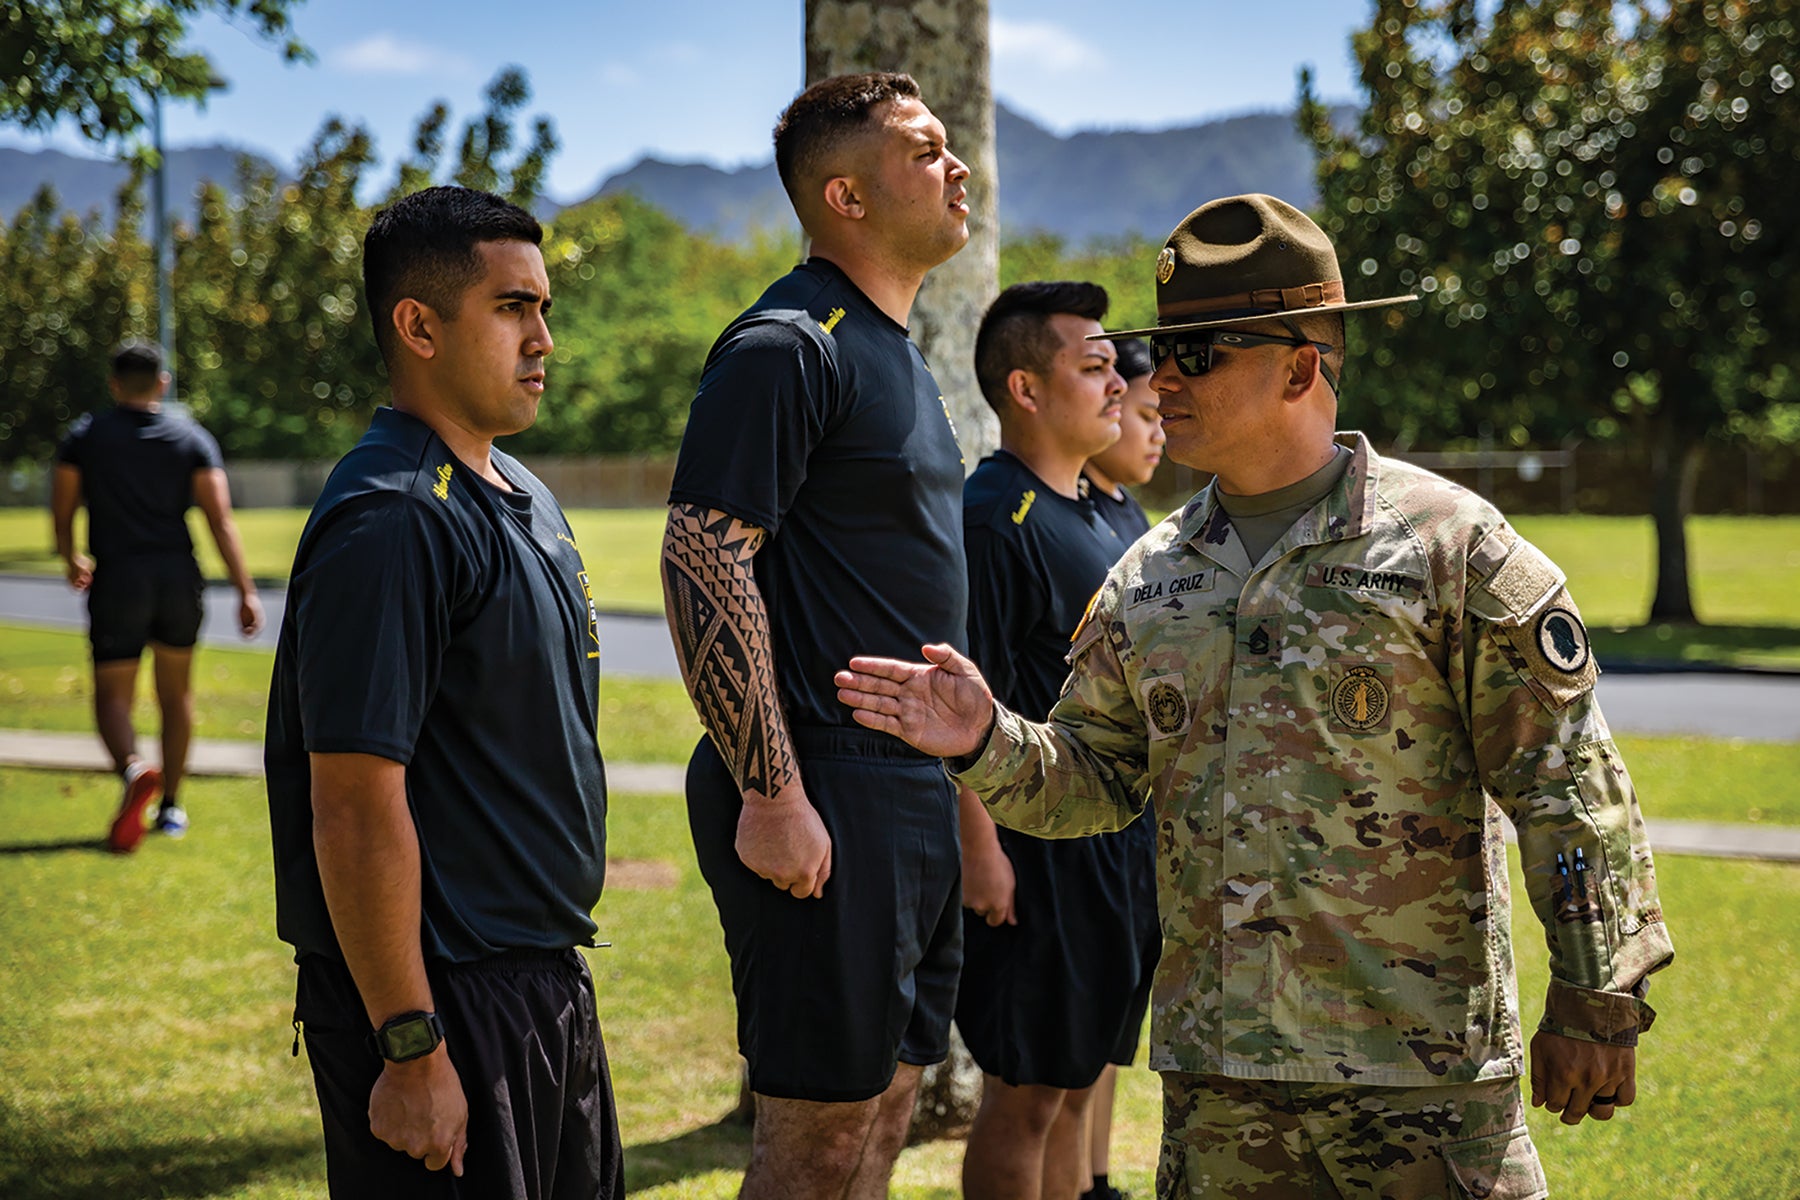 Sgt. 1st Class Landen Dela Cruz, right, a drill sergeant with the Hawaii Army National Guard’s Recruiting and Retention Battalion, instructs recruits at the Regional Training Institute, Waimanalo. (Army National Guard/Sgt. Lianne Hirano)